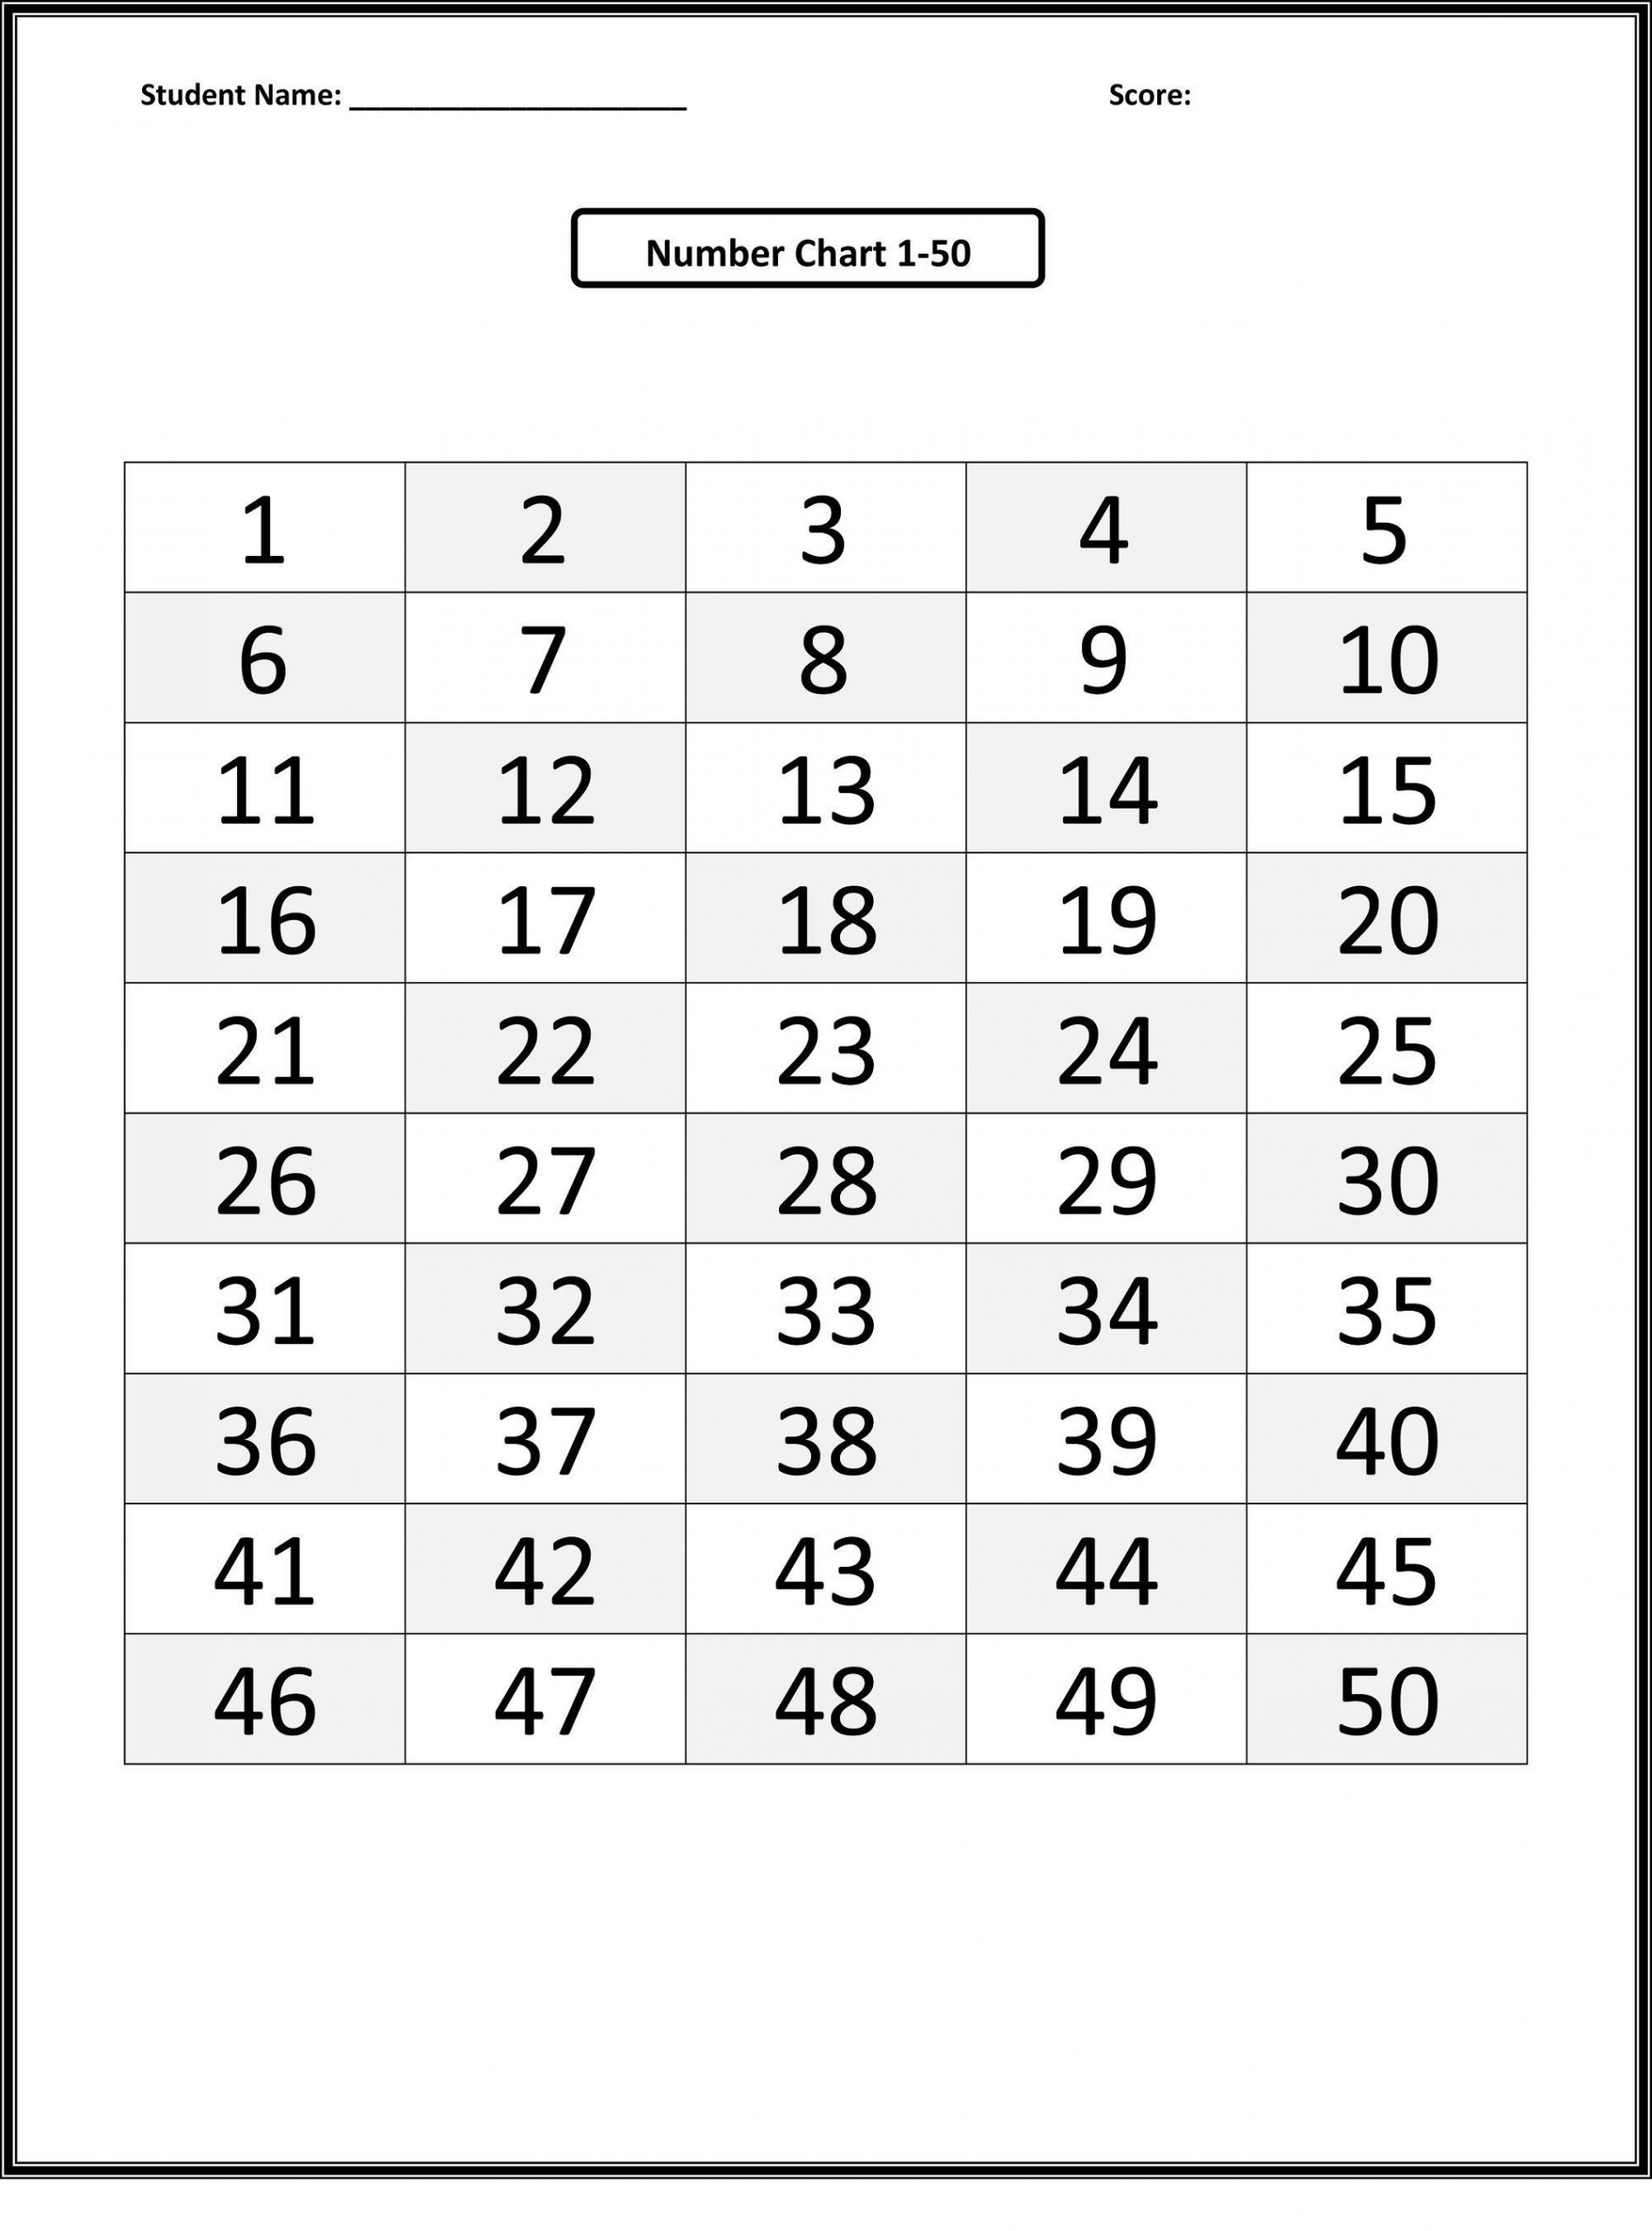 Number Chart 1-50 For Kids In 2020 (With Images) | Number